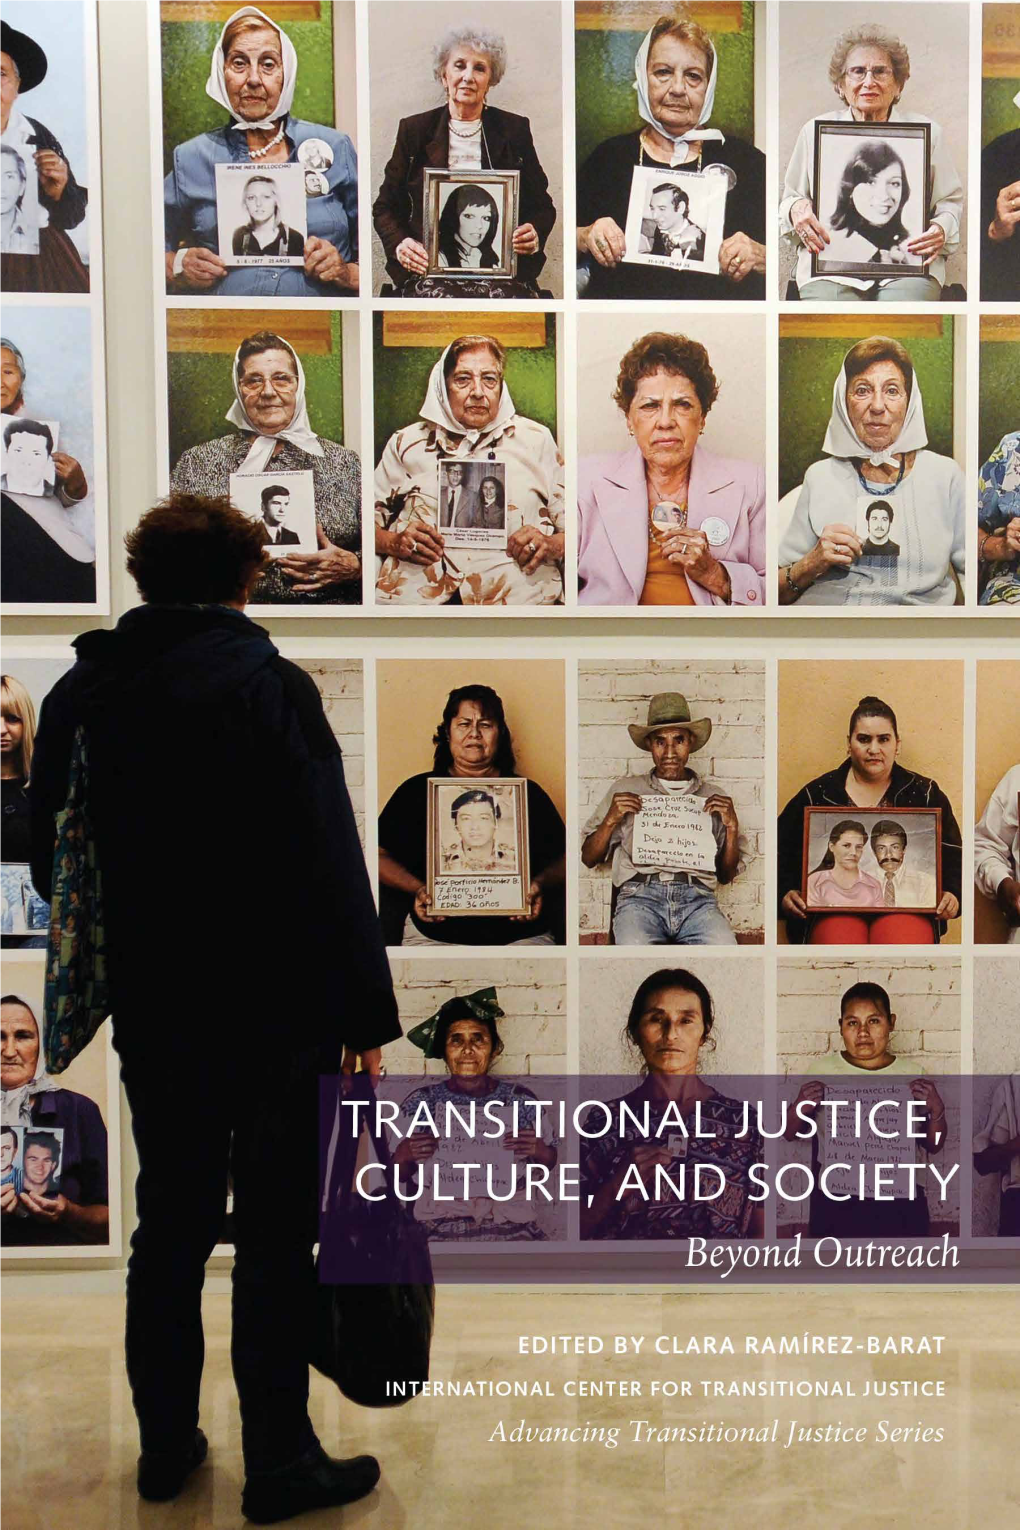 Transitional Justice, Culture, and Society : Beyond Outreach / Edited by Clara Ramirez-Barat, International Center for Transitional Justice